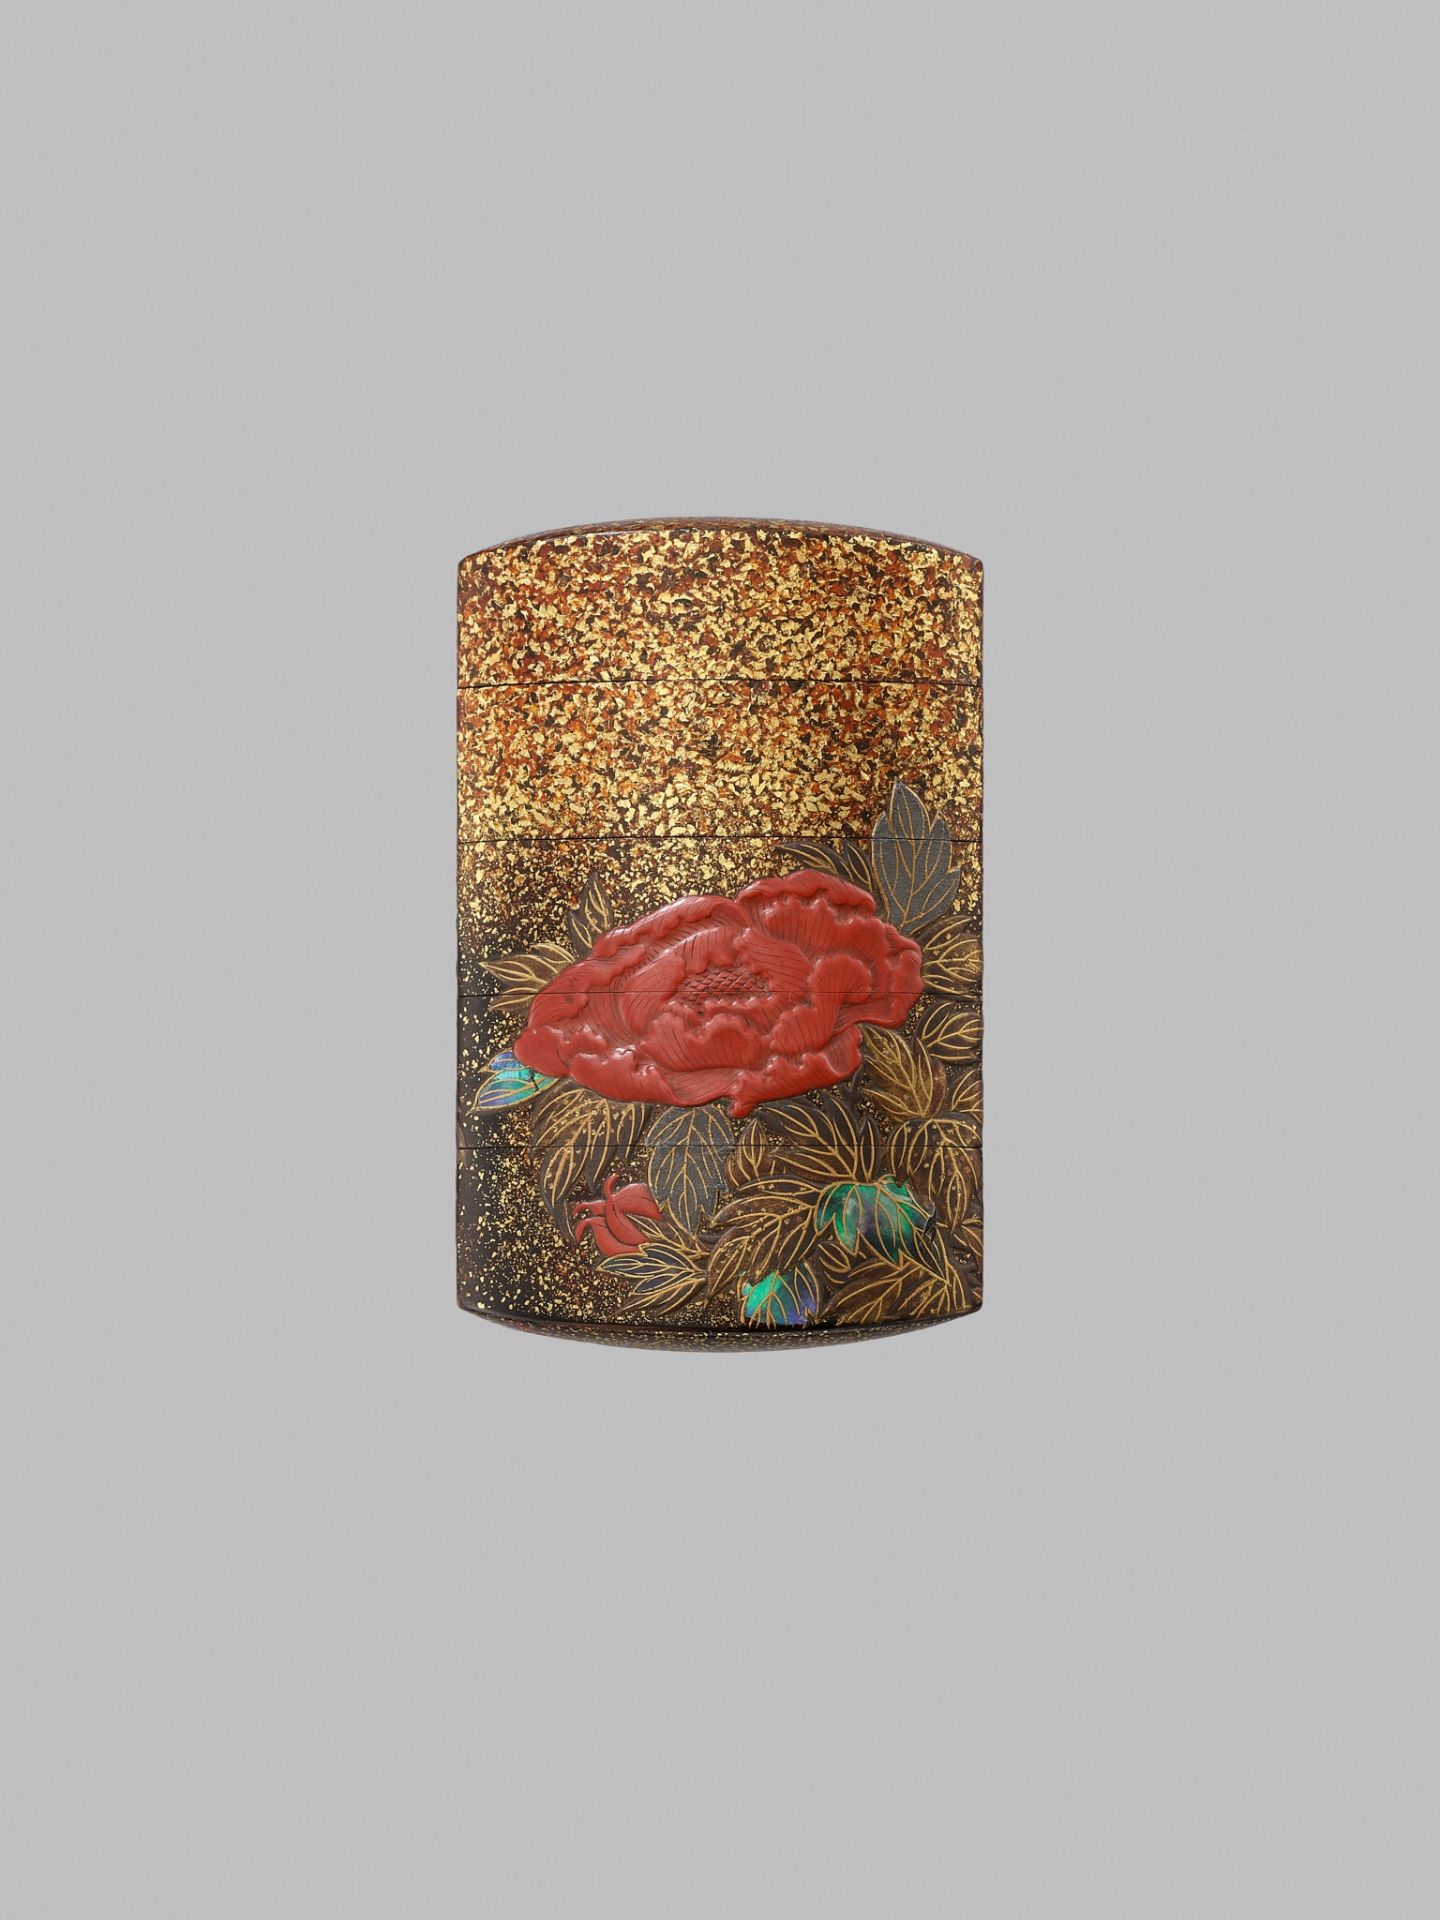 KOMA KORYU: A FINE LACQUER FOUR-CASE INRO WITH PEONIES - Image 3 of 7